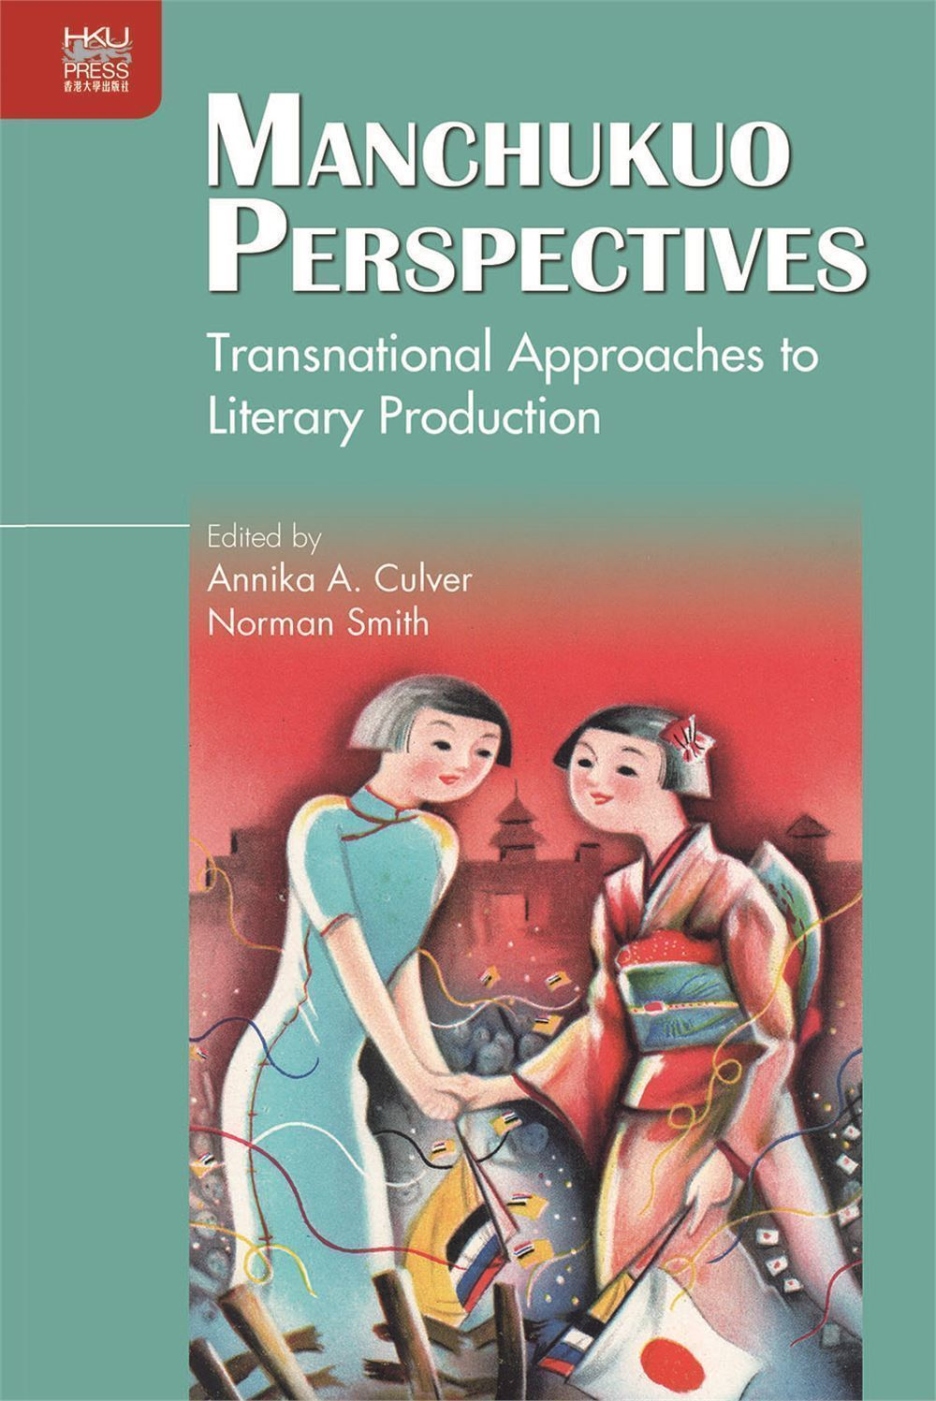 Manchukuo Perspectives: Transnational Approaches to Literary Production